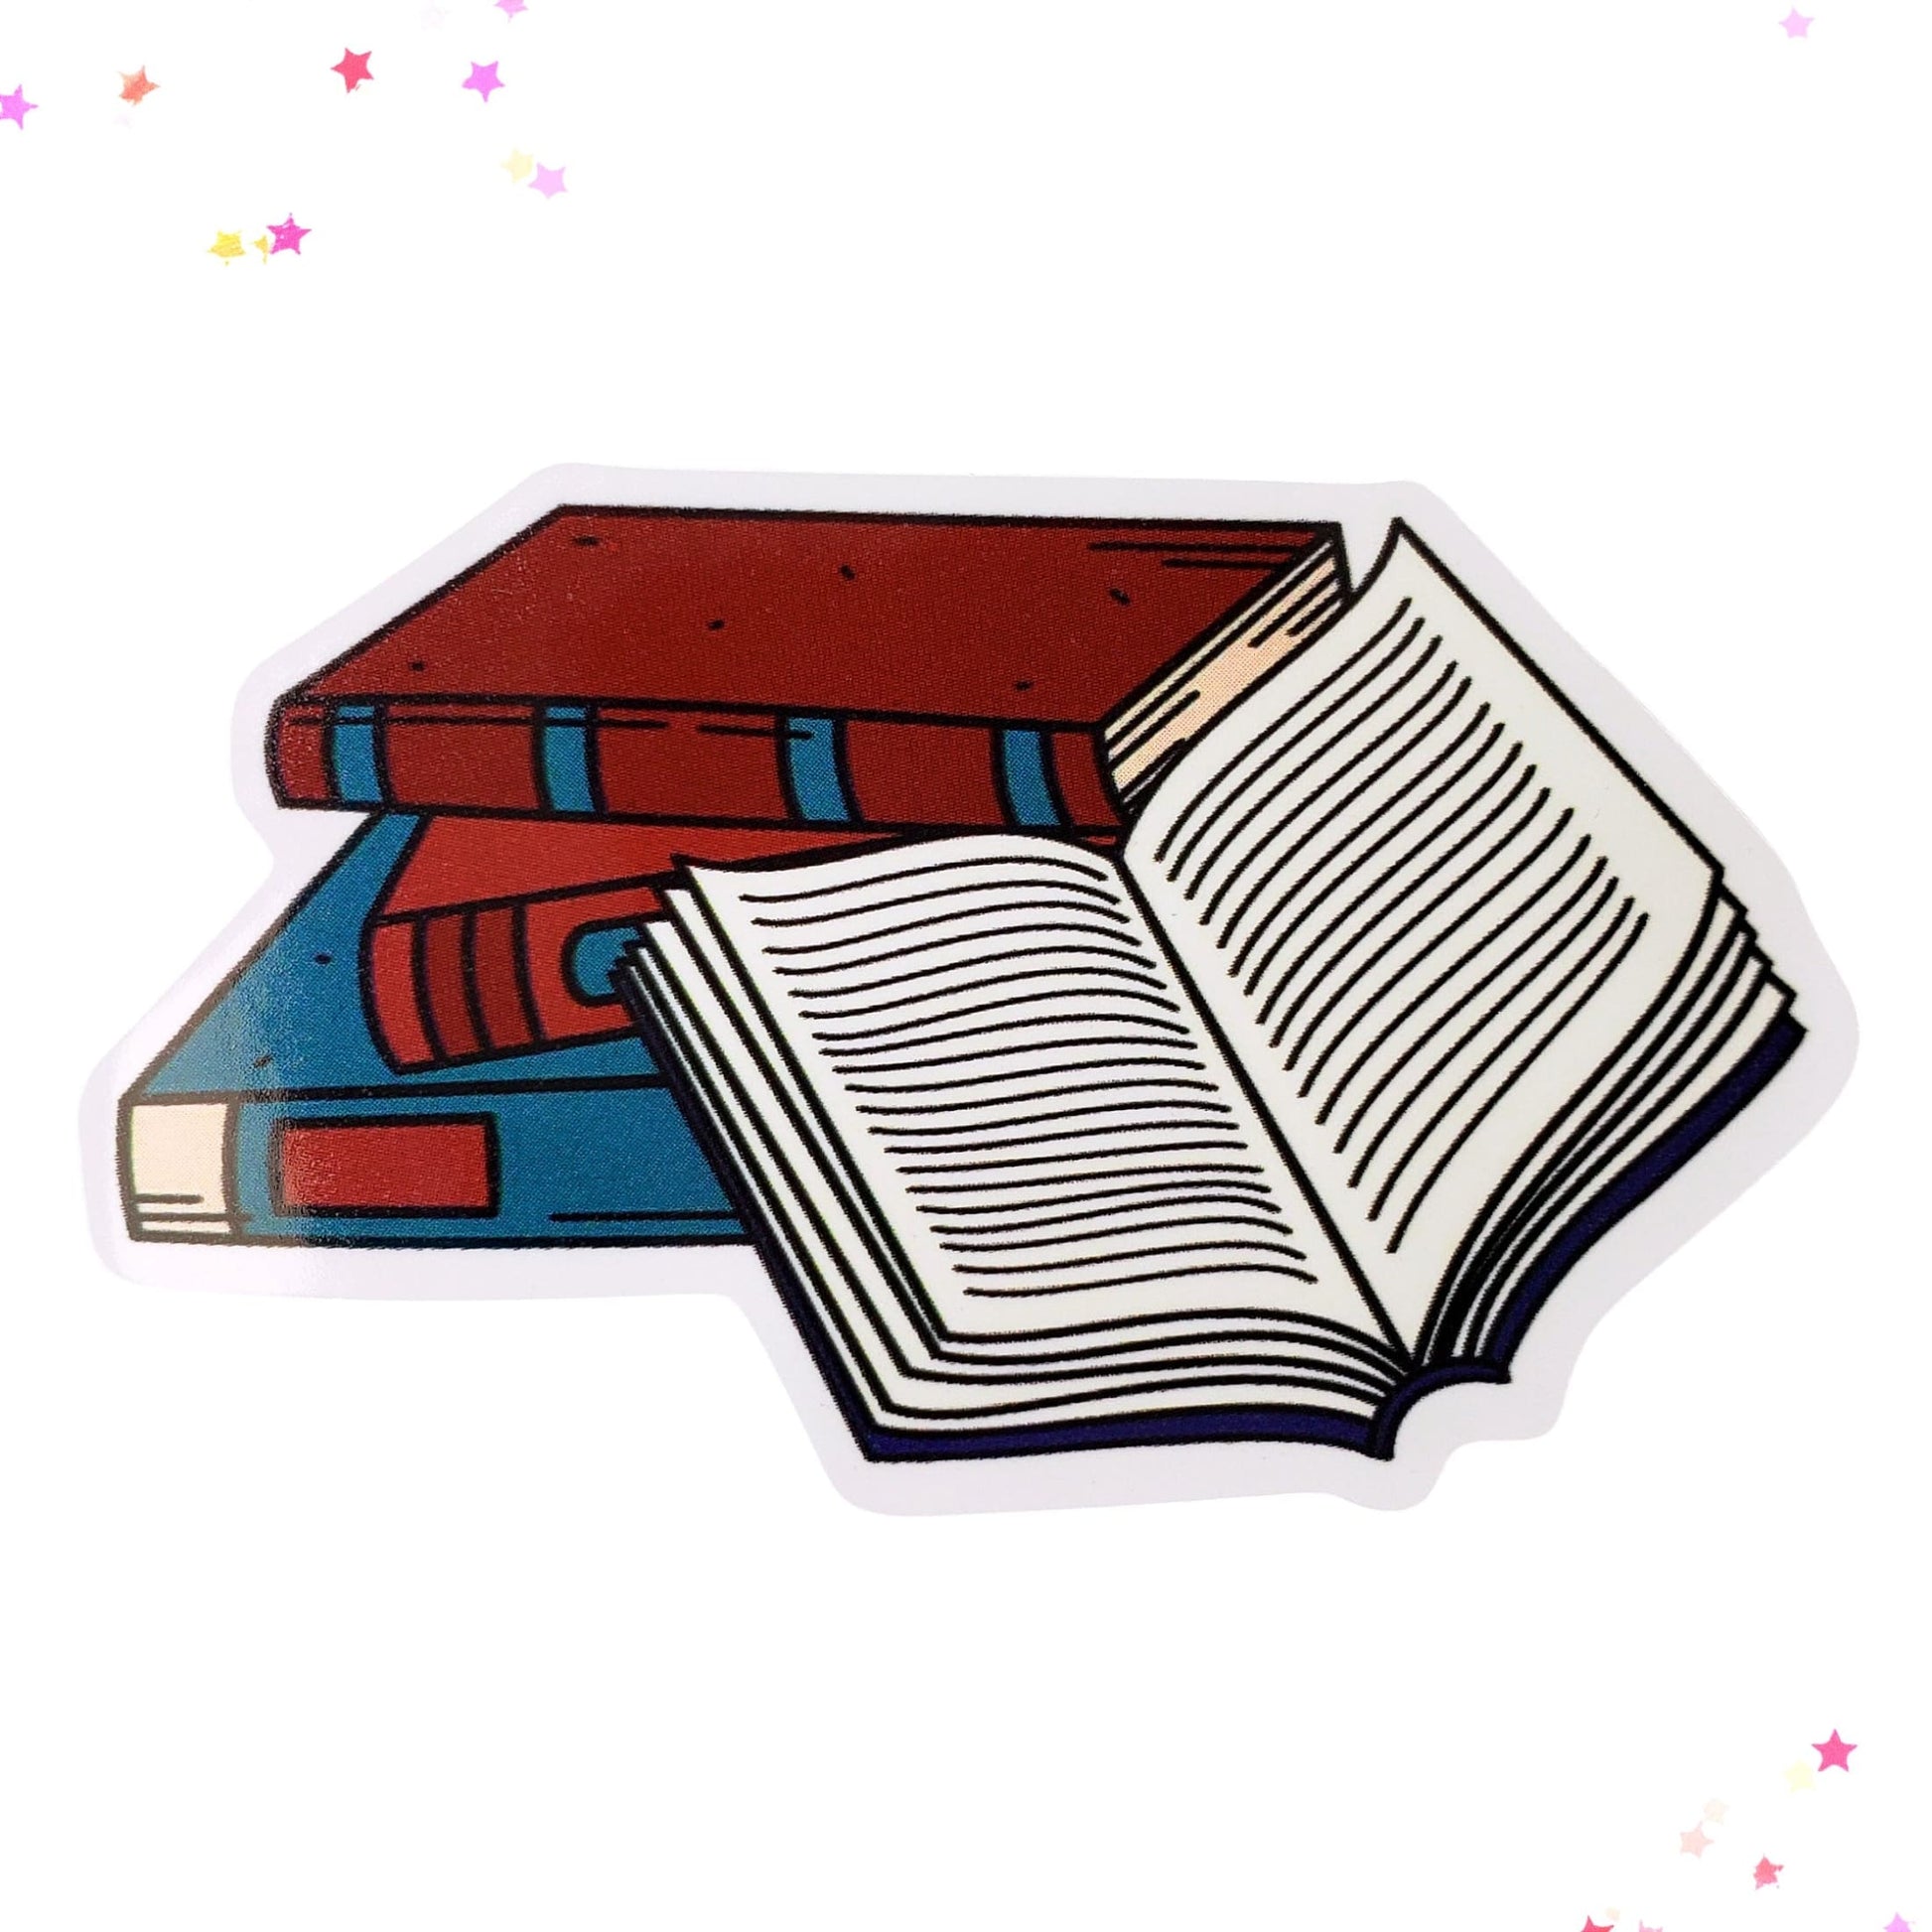 Study Books Waterproof Sticker from Confetti Kitty, Only 1.00